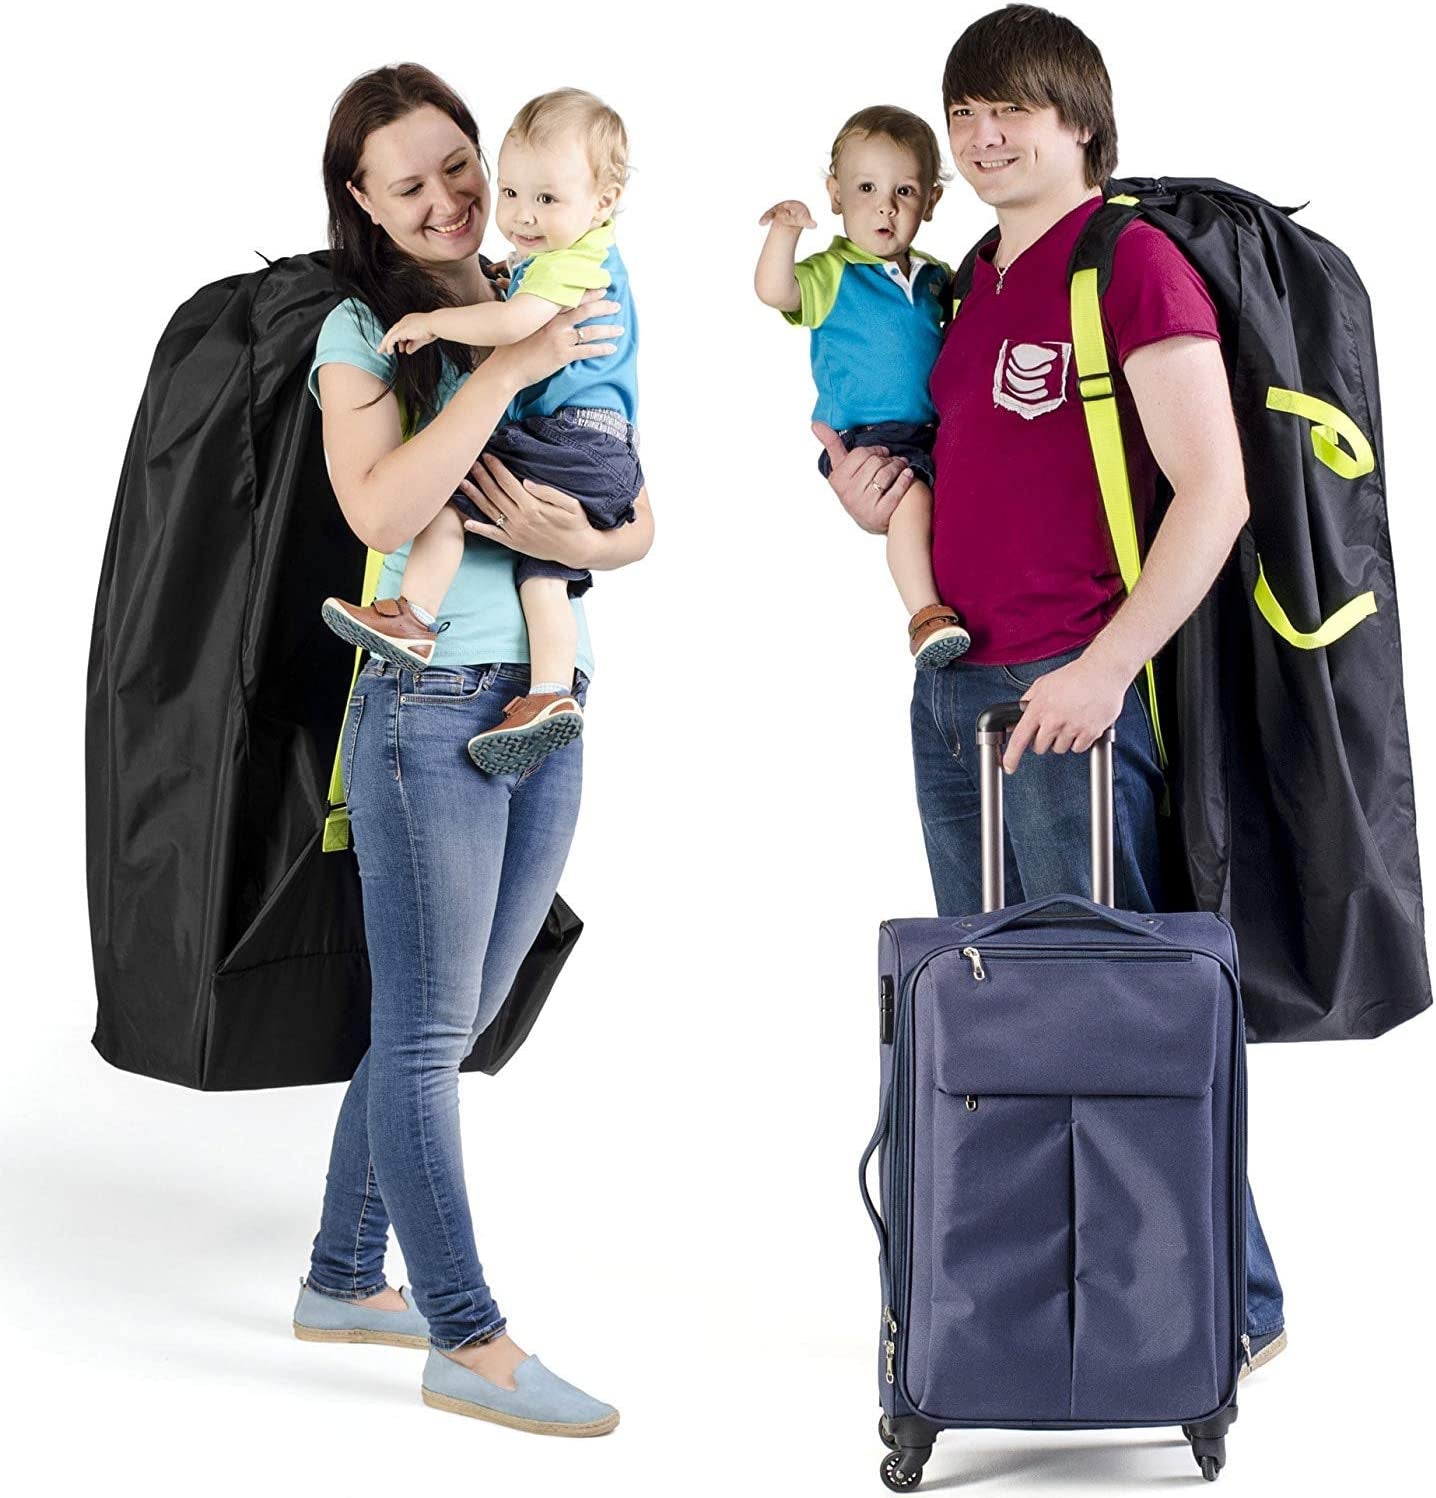 VolkGo Premium Quality Durable Stroller Bag for Airplane - Standard or Double/Dual Stroller Gate Check Bag